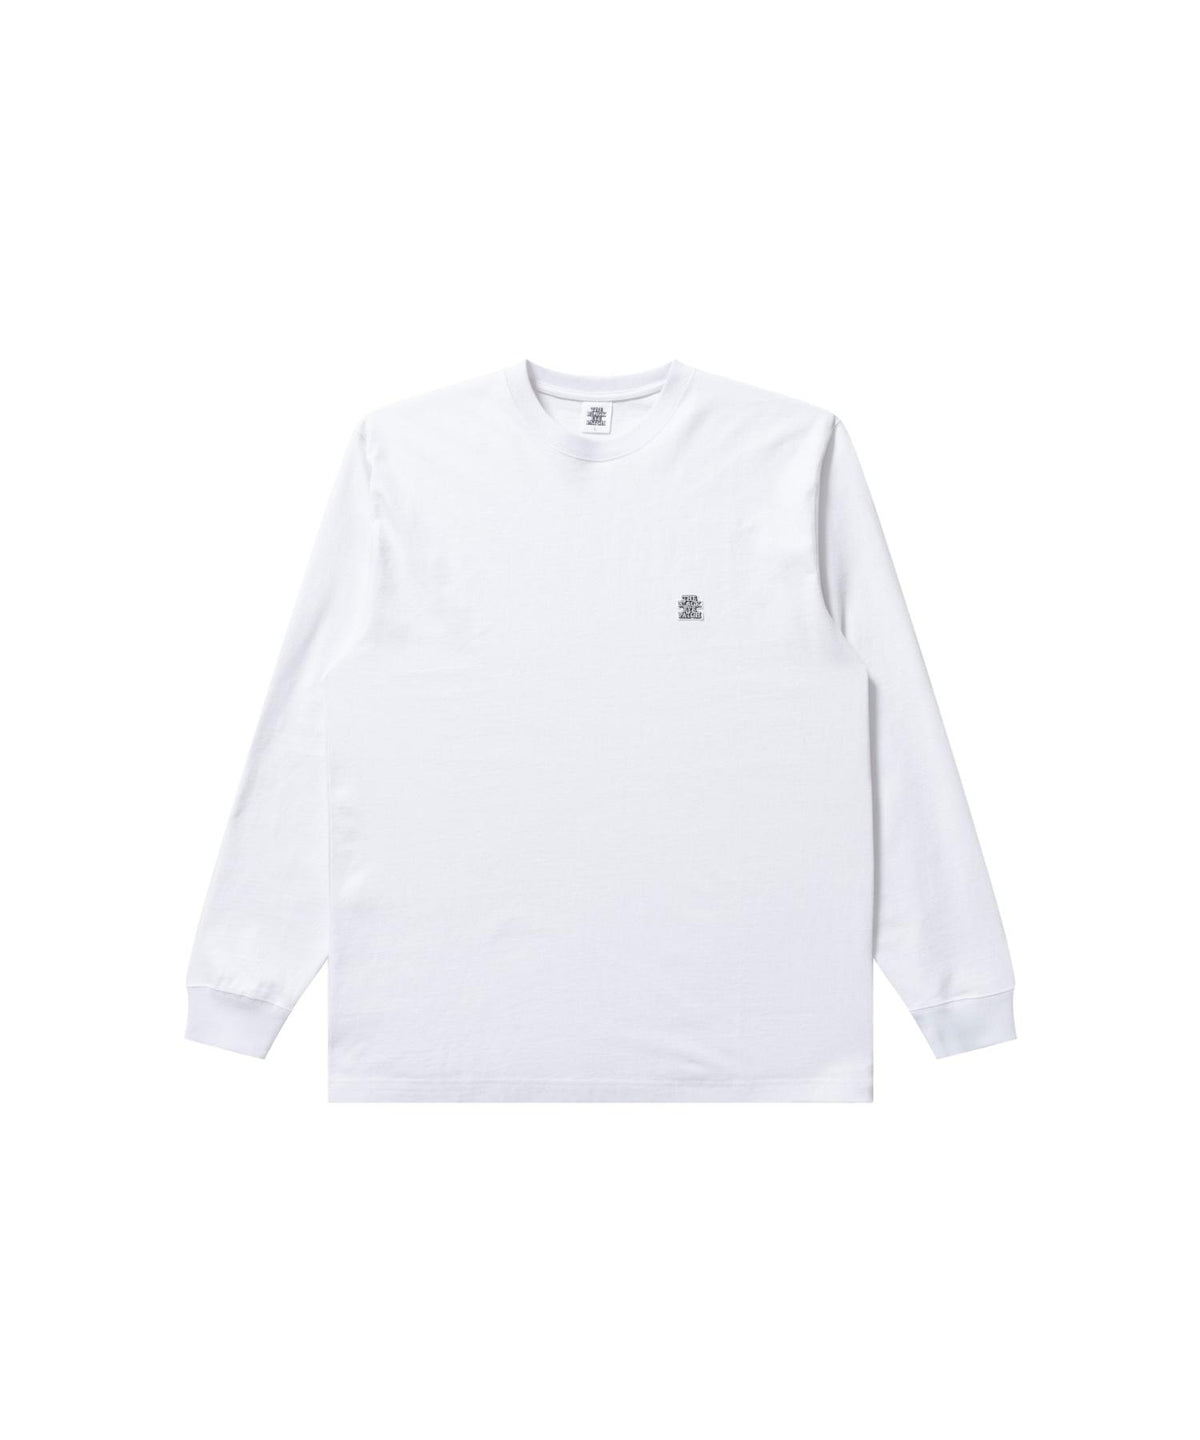 SMALL OG LABEL L/S TEE